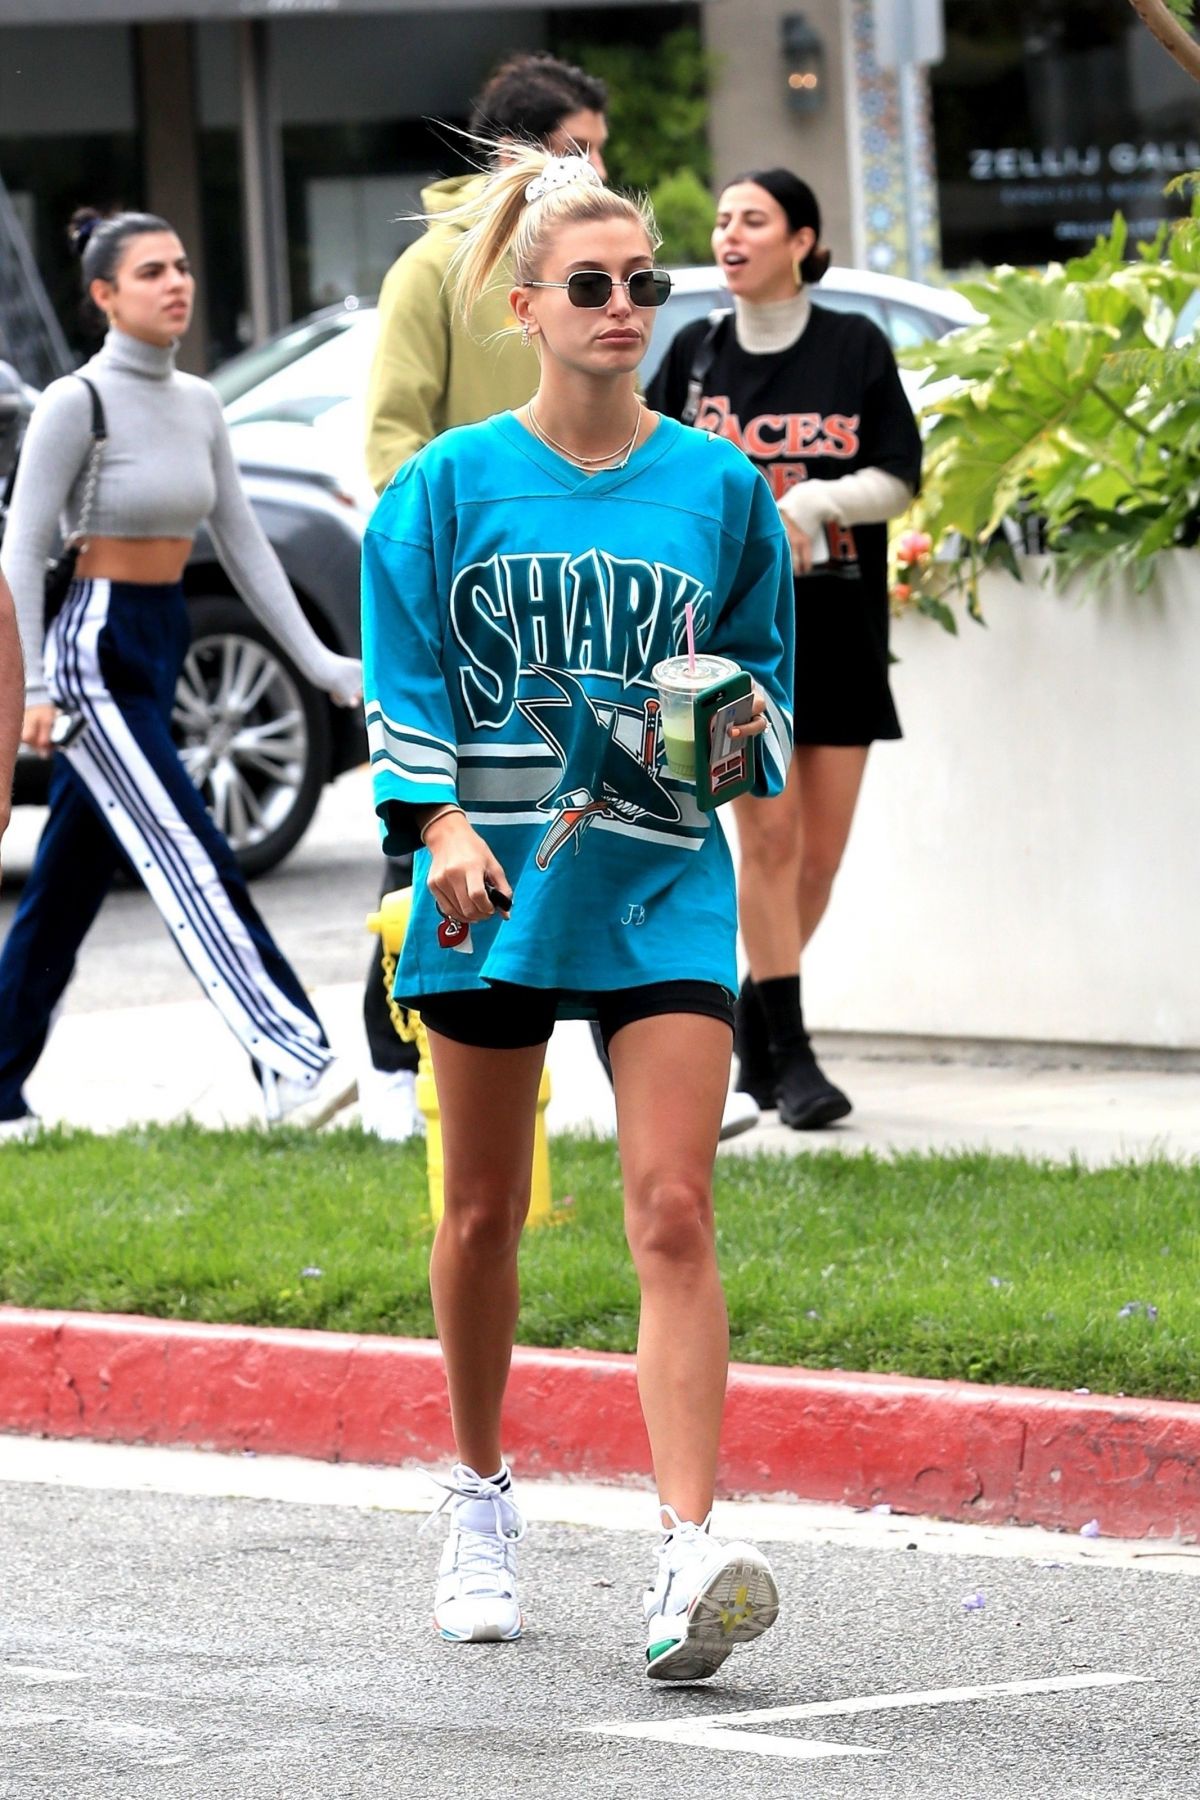 HAILEY BIEBER at Cha Cha Matcha in West Hollywood 05/18/2019 – HawtCelebs